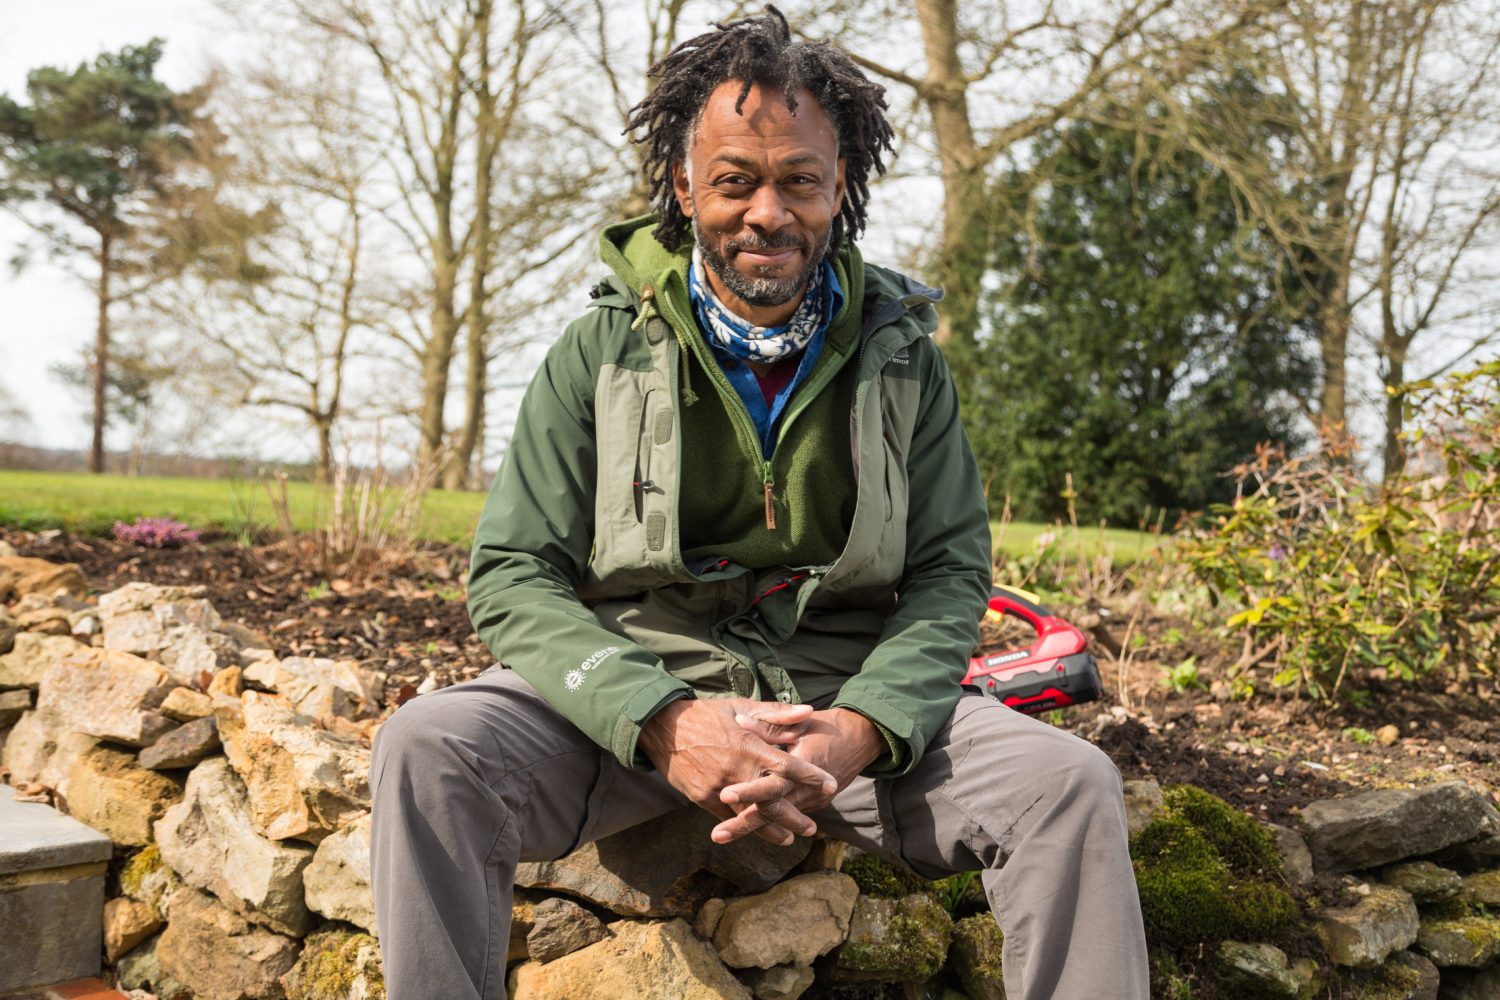 BBC presenter Danny Clarke explains what drew him into the world of horticulture